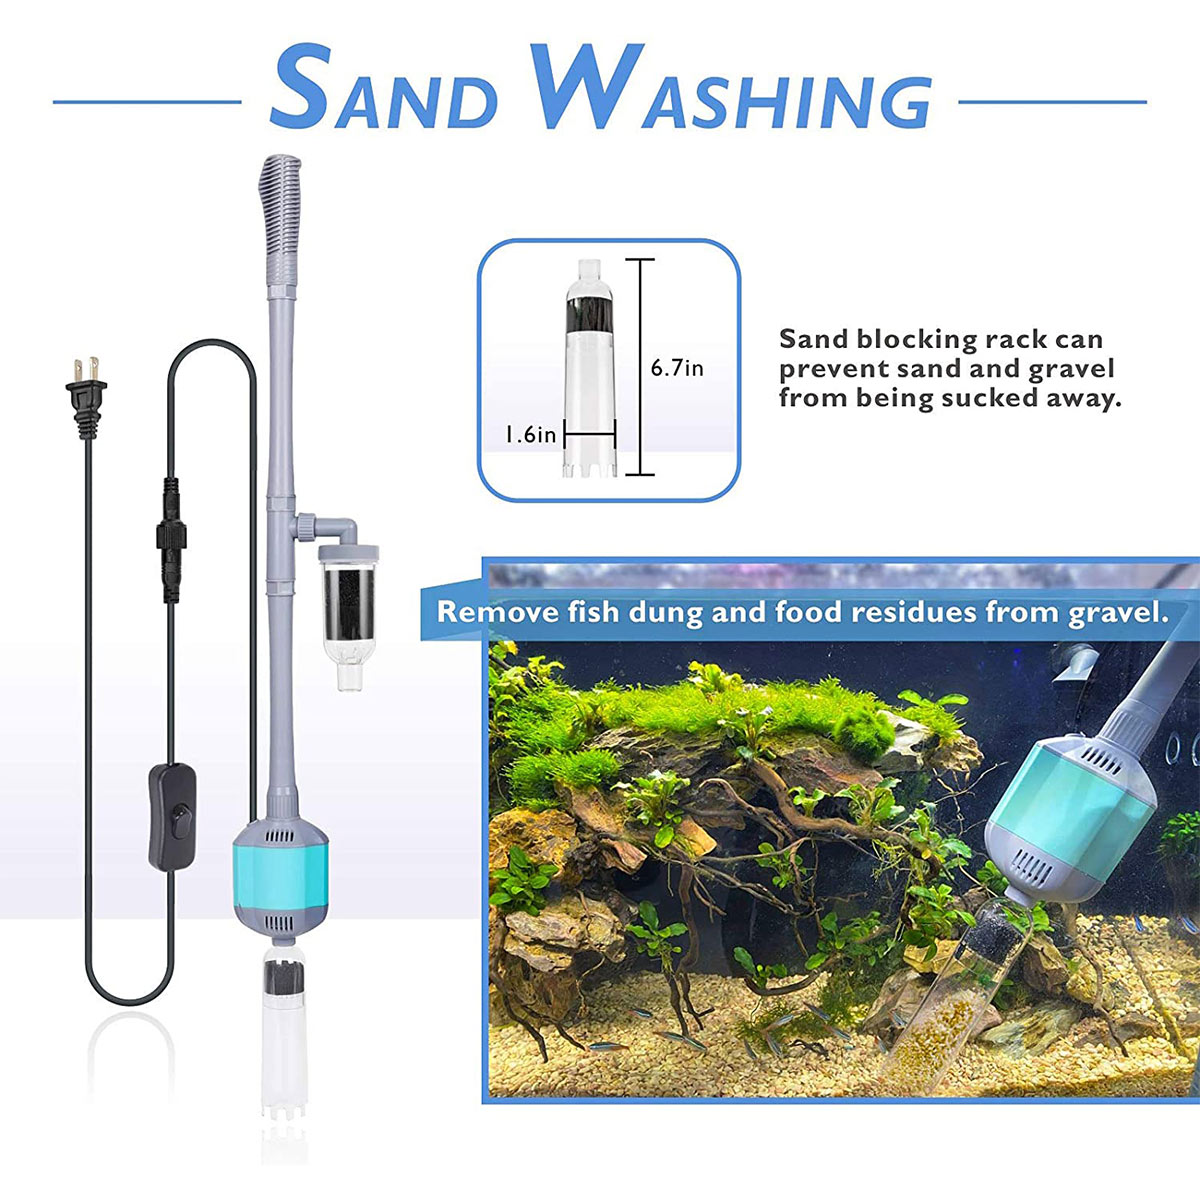 Run in Seconds Aquarium Gravel Cleaner Low Water Level Water Changer Fish Tank Cleaner with Pinch or Grip Suction Ball Adjustable Length hygger Manual 256GPH Gravel Vacuum for Aquarium 